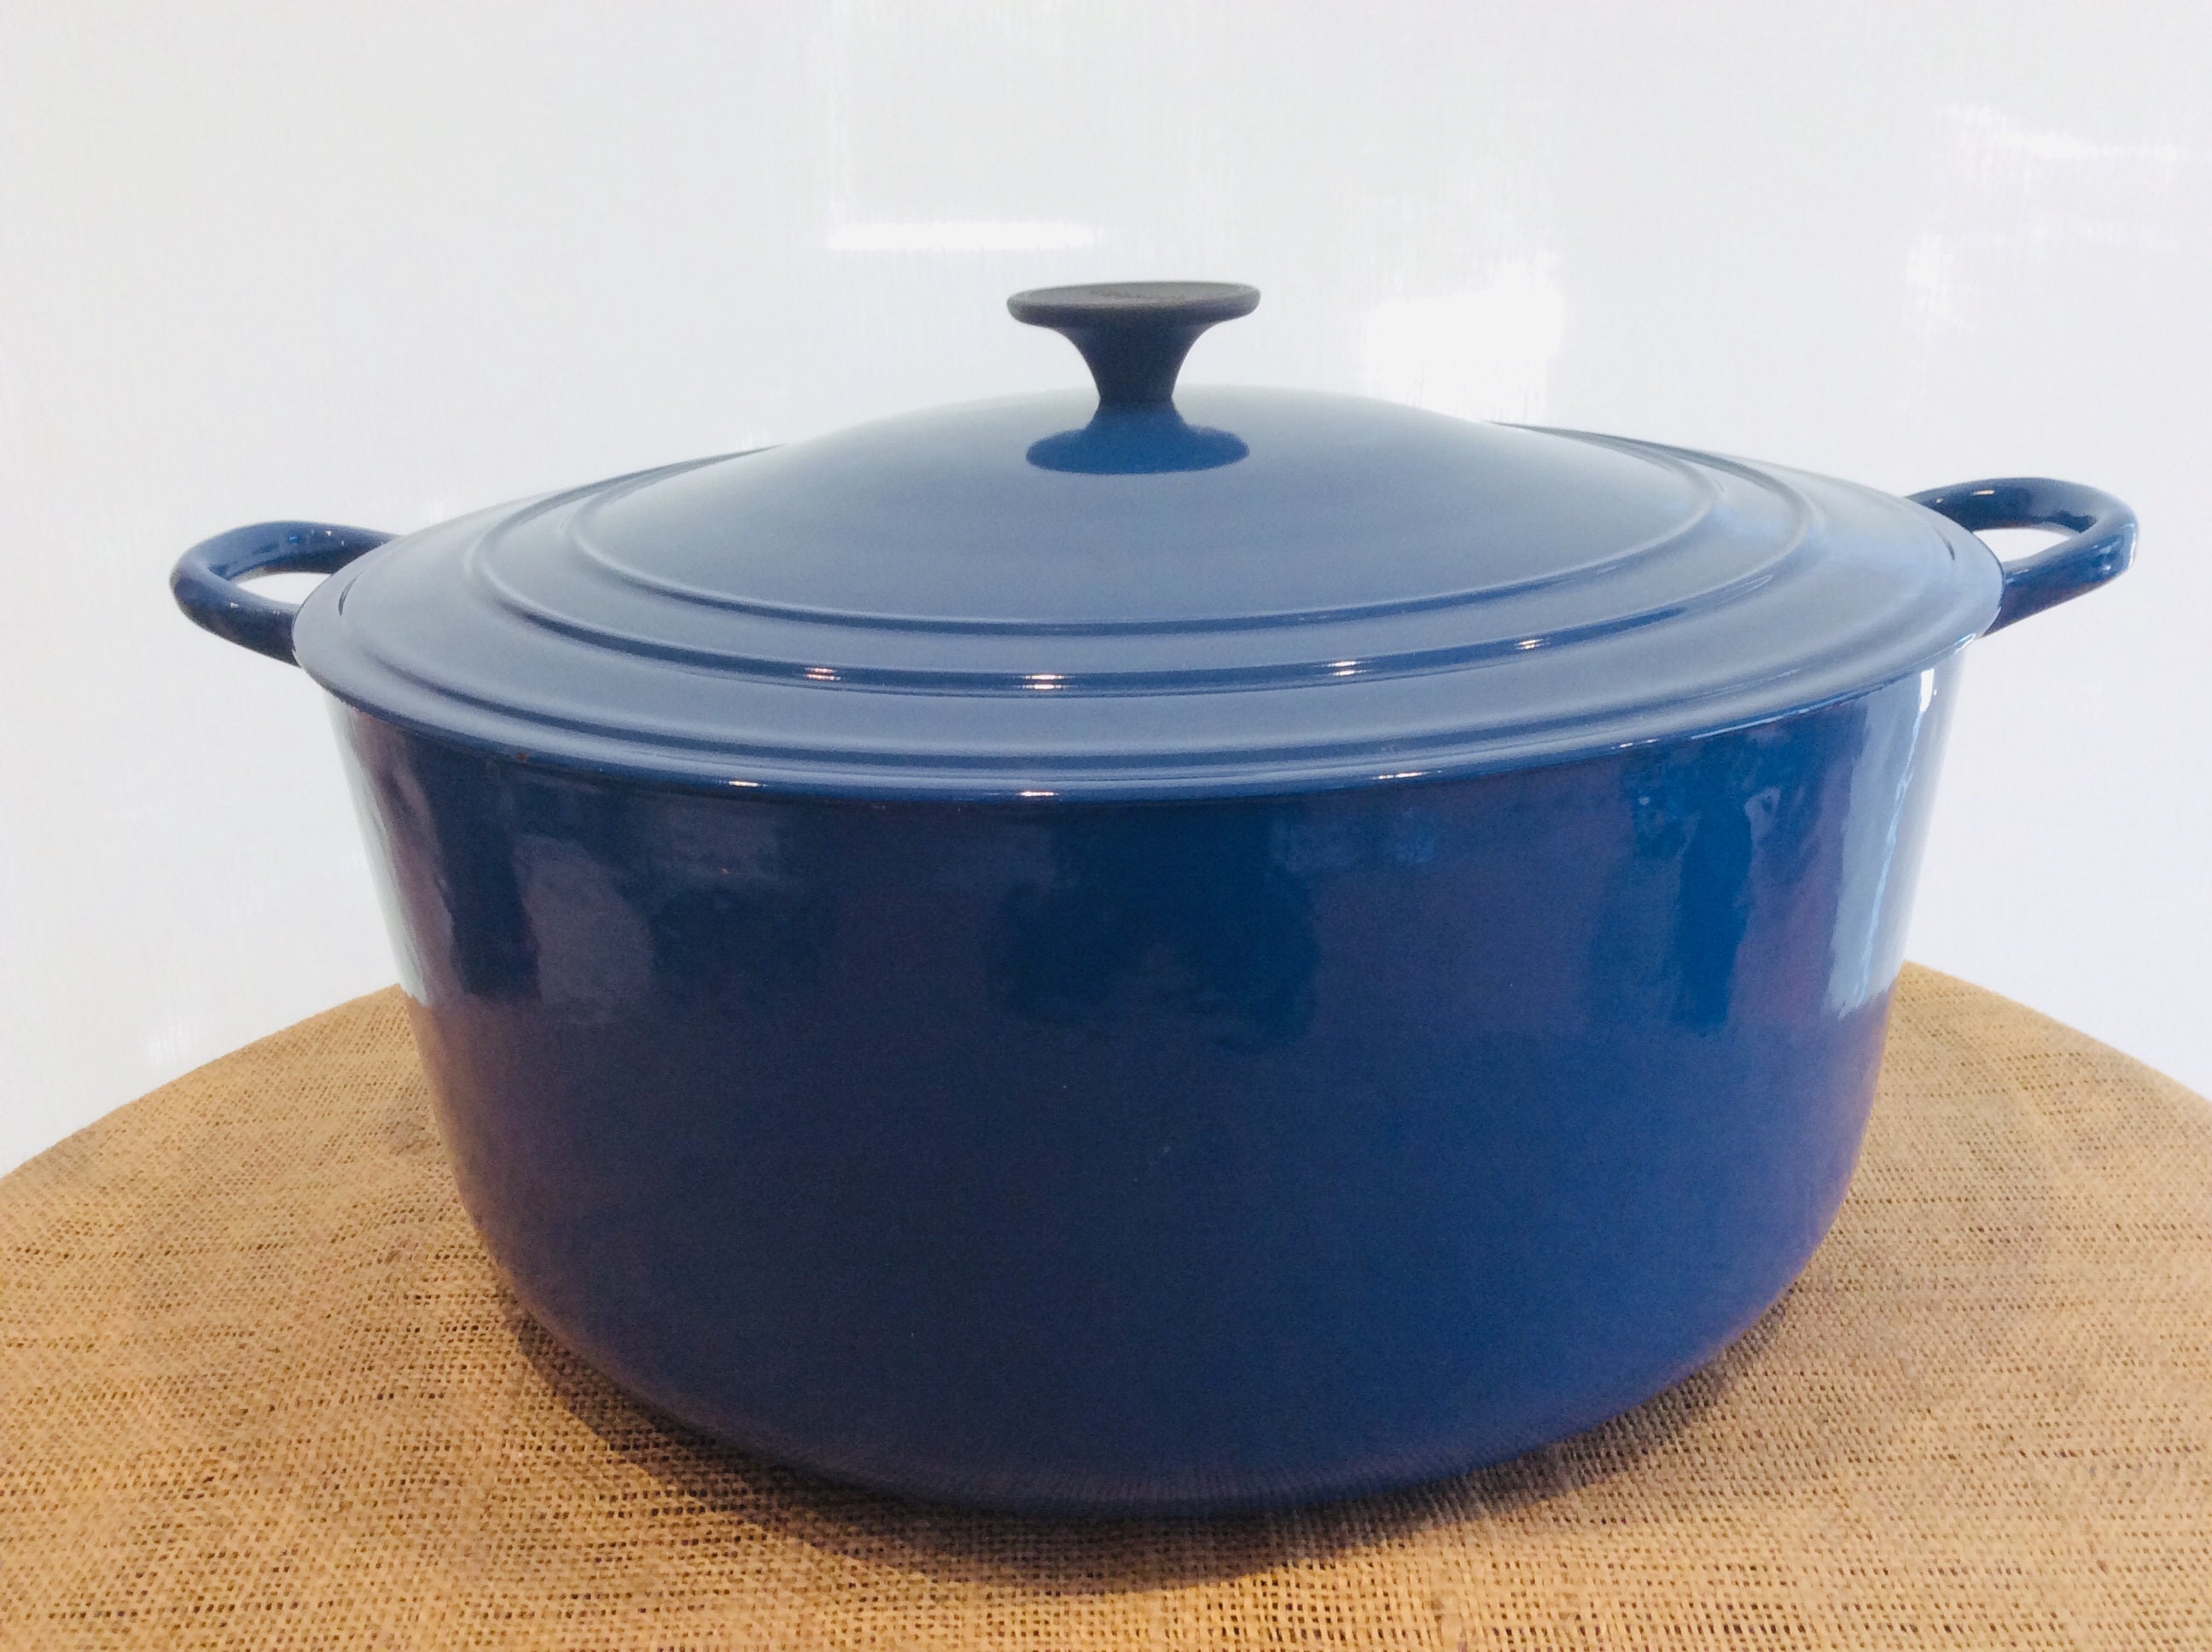 Le Creuset 13 1/4 Qt. Dutch Oven Marked k, Weighs 21.5 Lbs., 13.75 Wide X 6  High, Color is Blue 